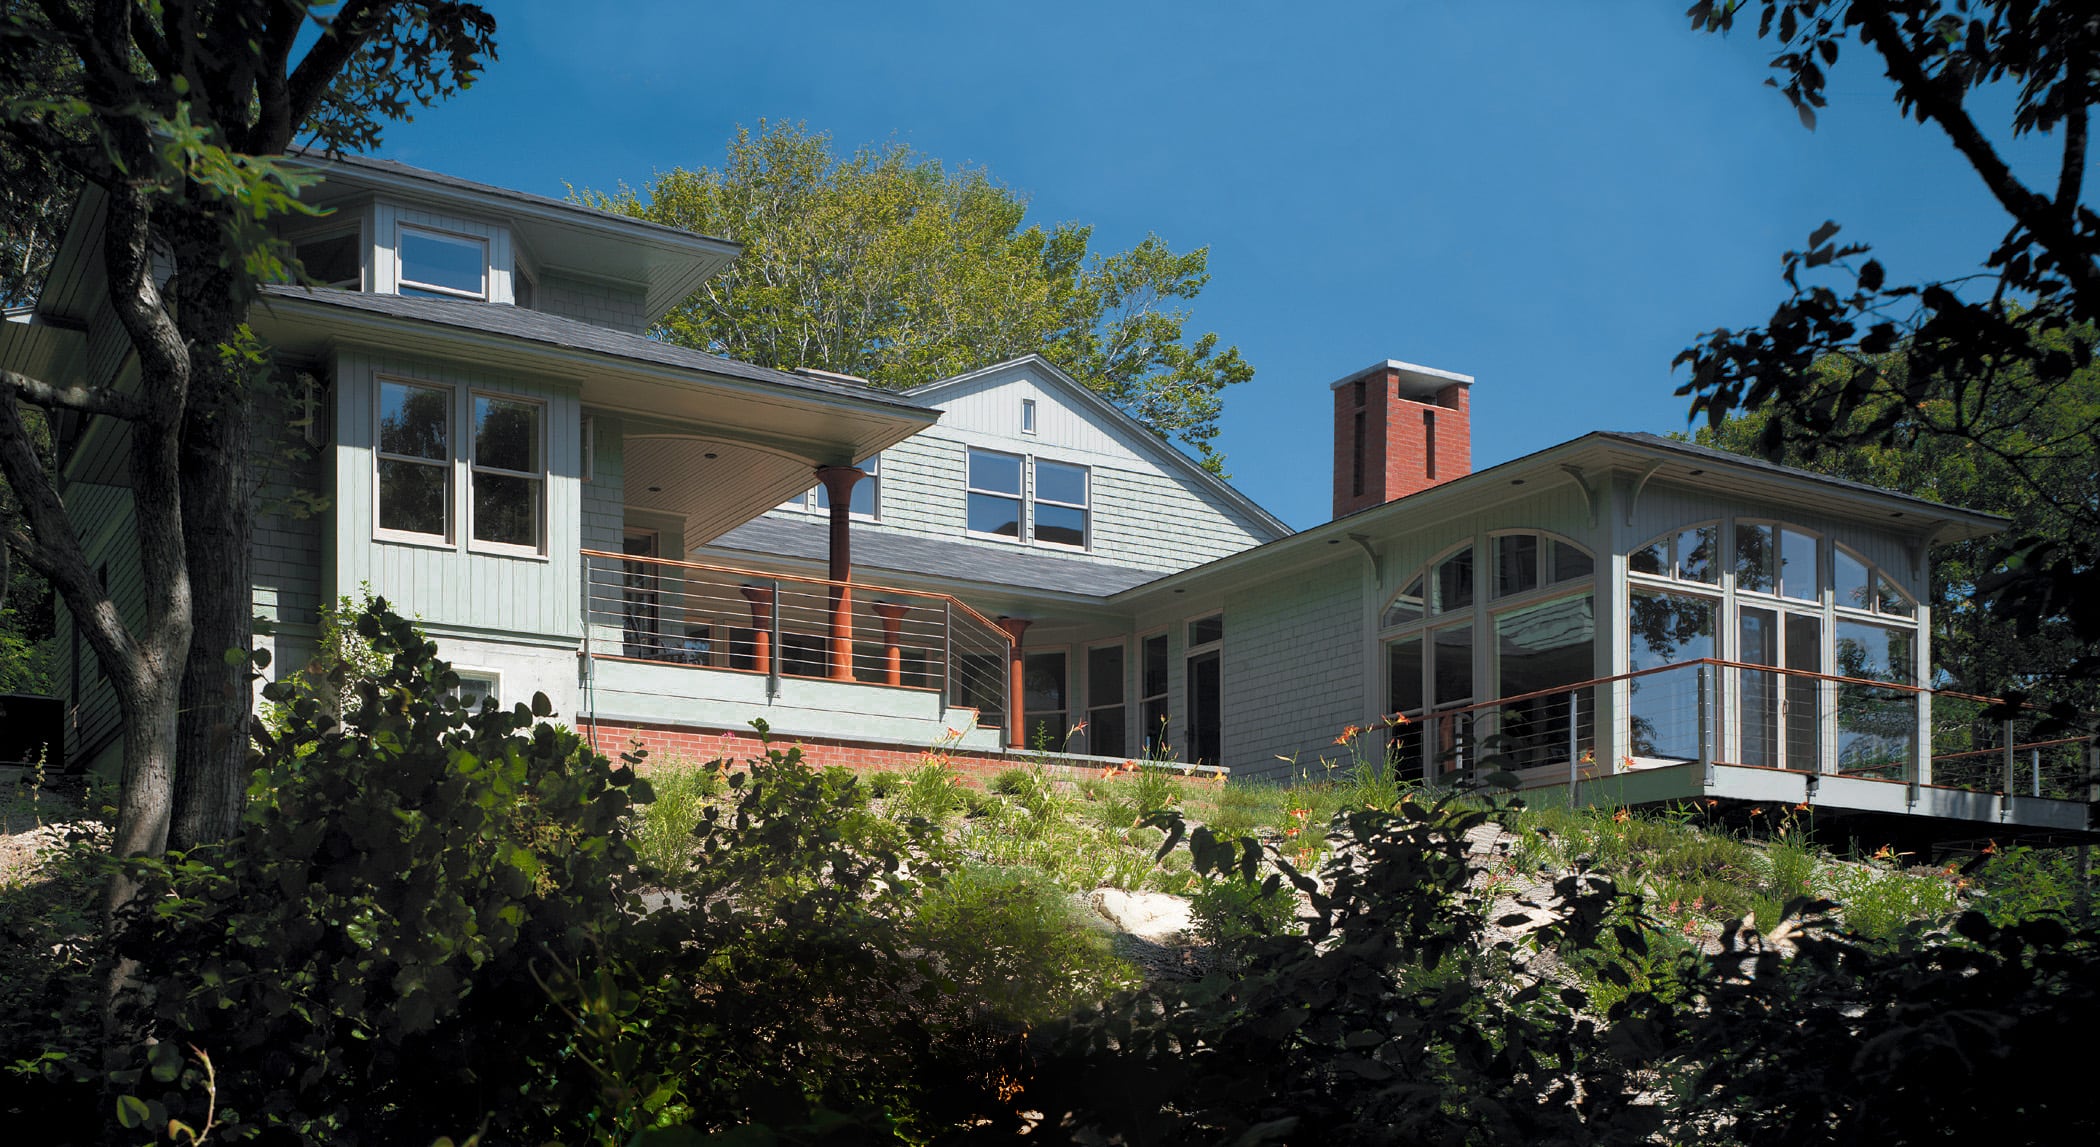 Woods Hole Retreat - Residential Architecture